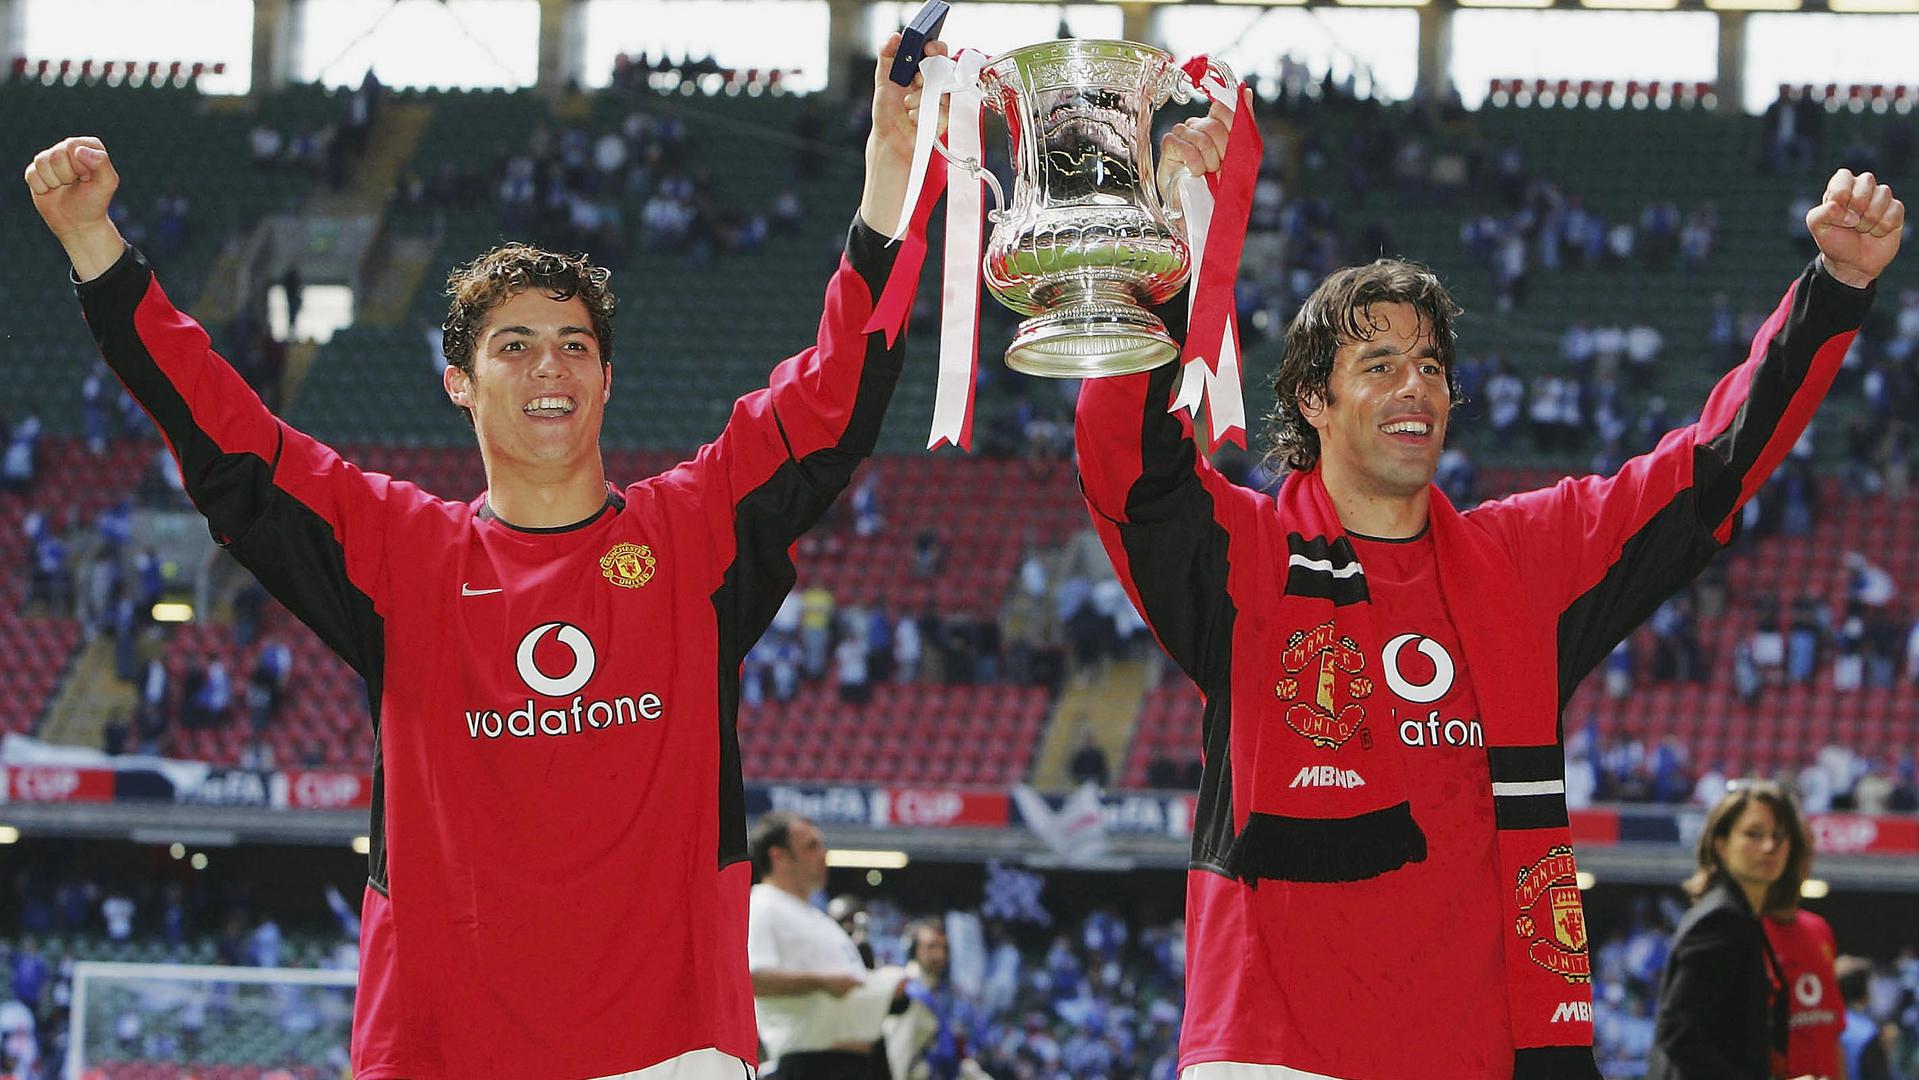 Ruud van Nistelrooy opens up on Cristiano Ronaldo BUST UP at Man Utd